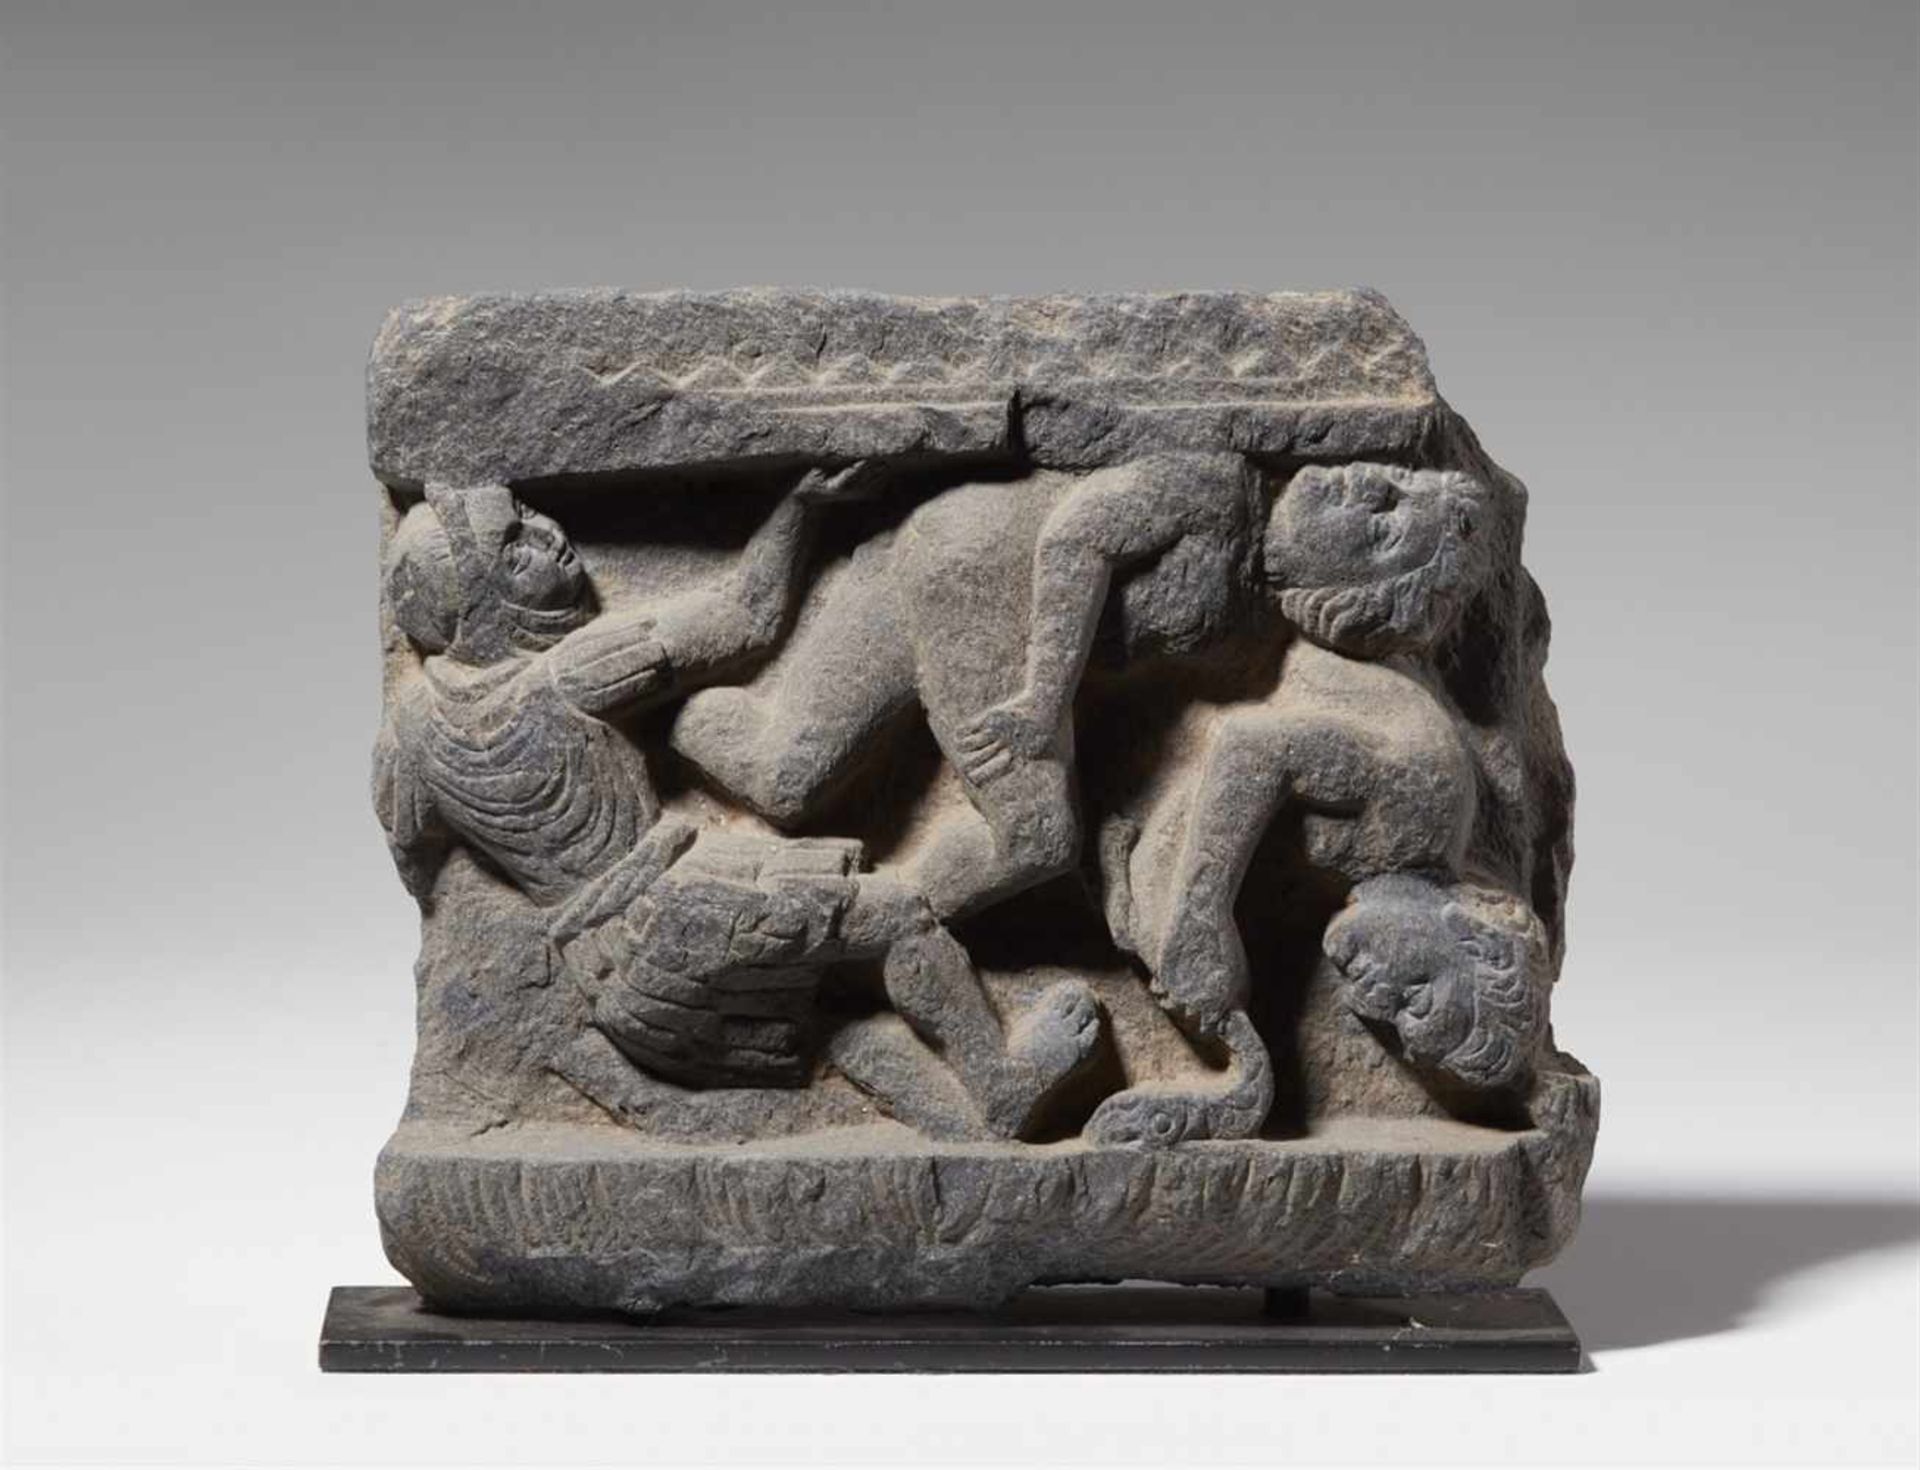 A Gandhara gray shist fragment, probably from the base of a stele. Pakistan. 2nd/3rd century